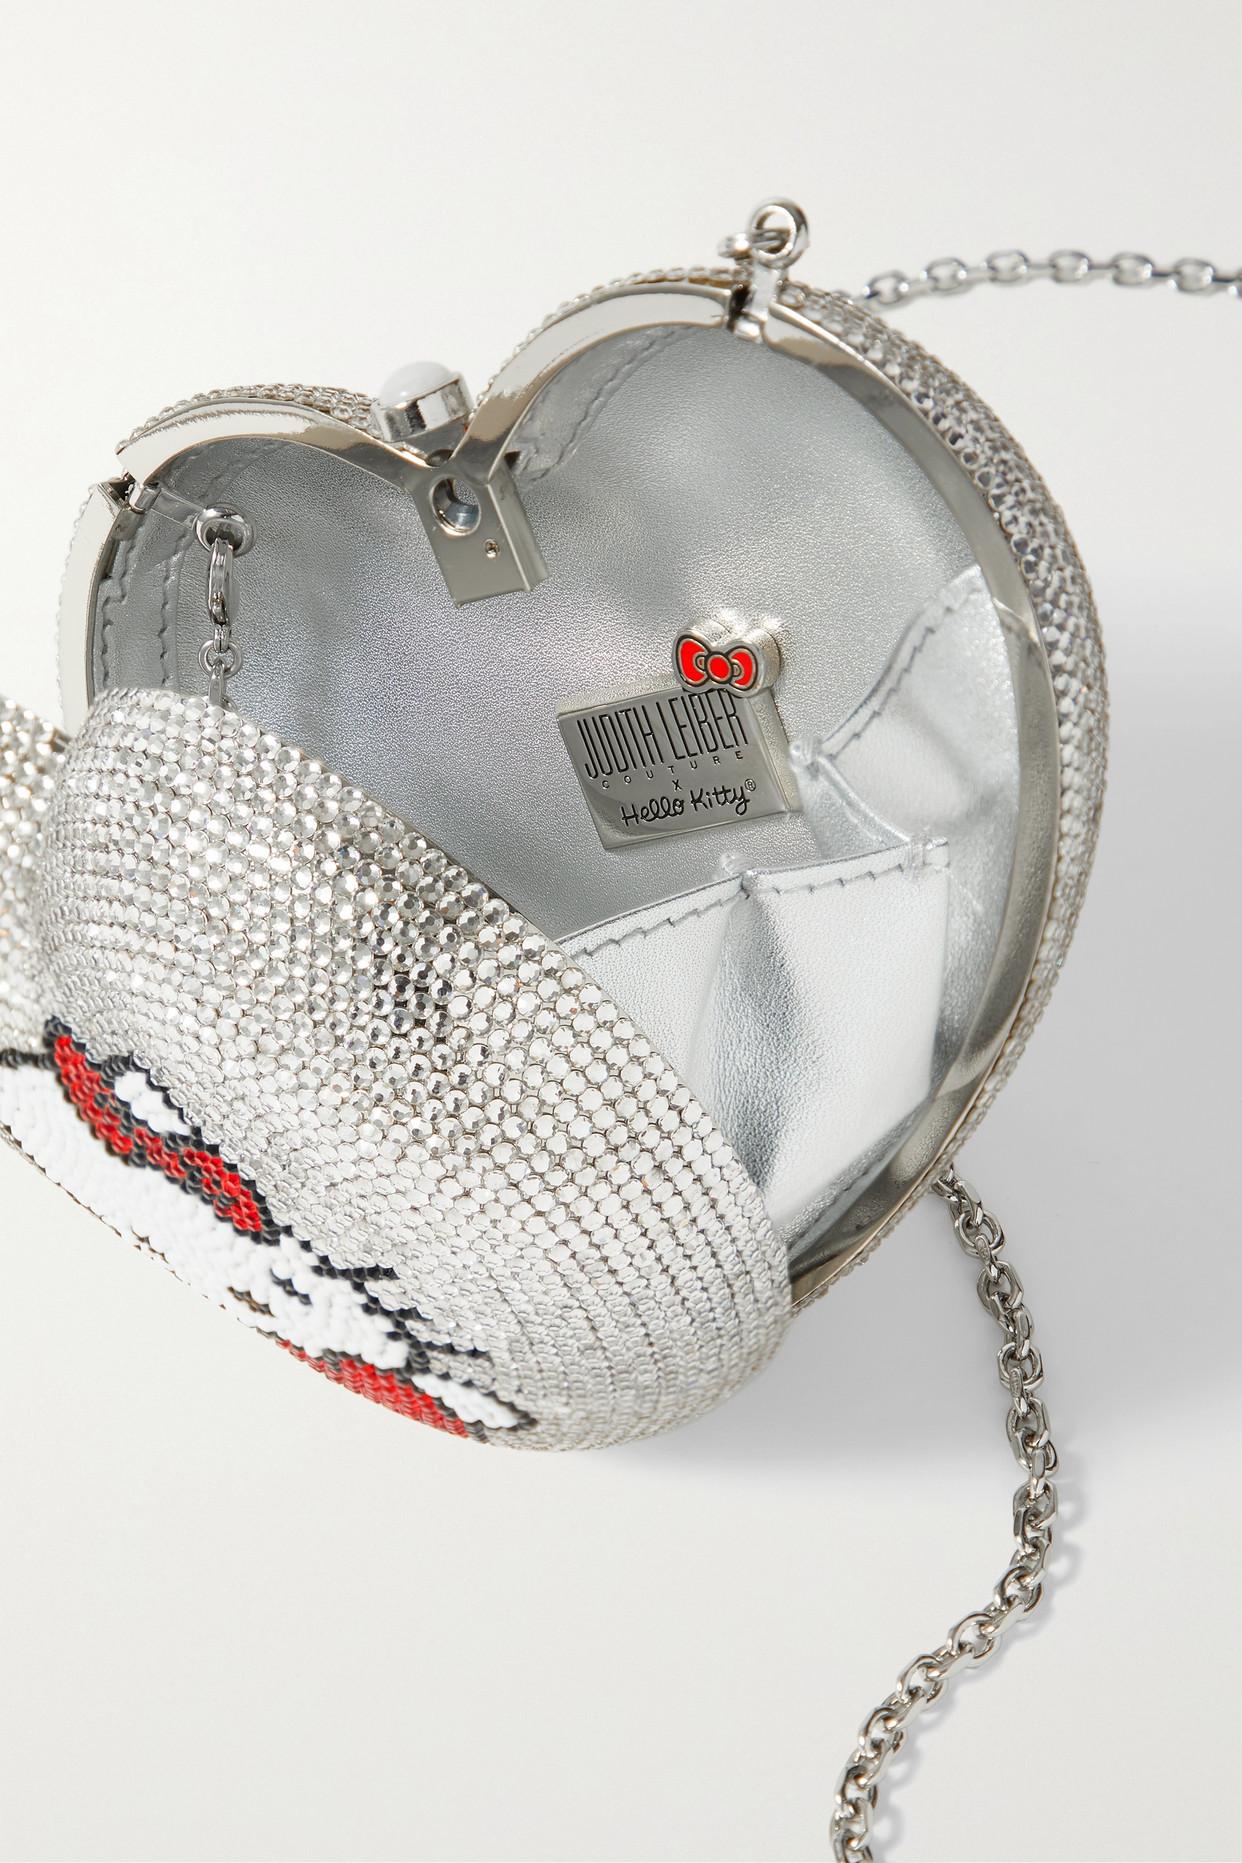 JUDITH LEIBER COUTURE Emirates crystal-embellished silver-tone clutch